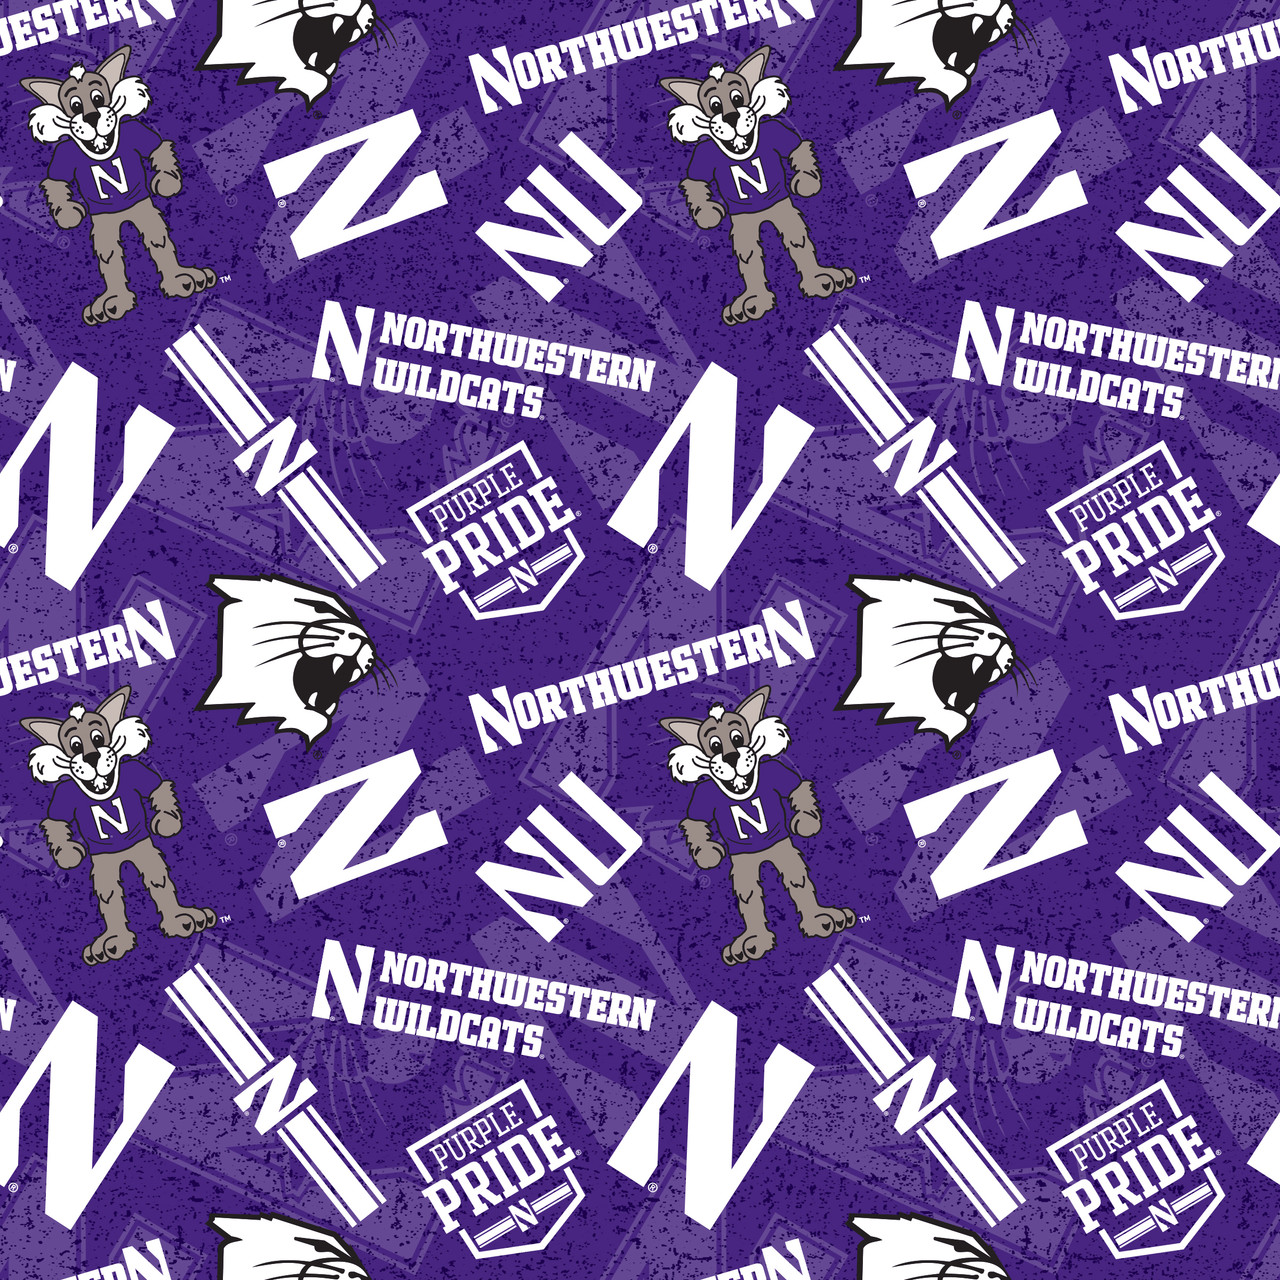 Northwestern University Wildcats Cotton Fabric with Tone On Tone Print or Matching Solid Cotton Fabrics